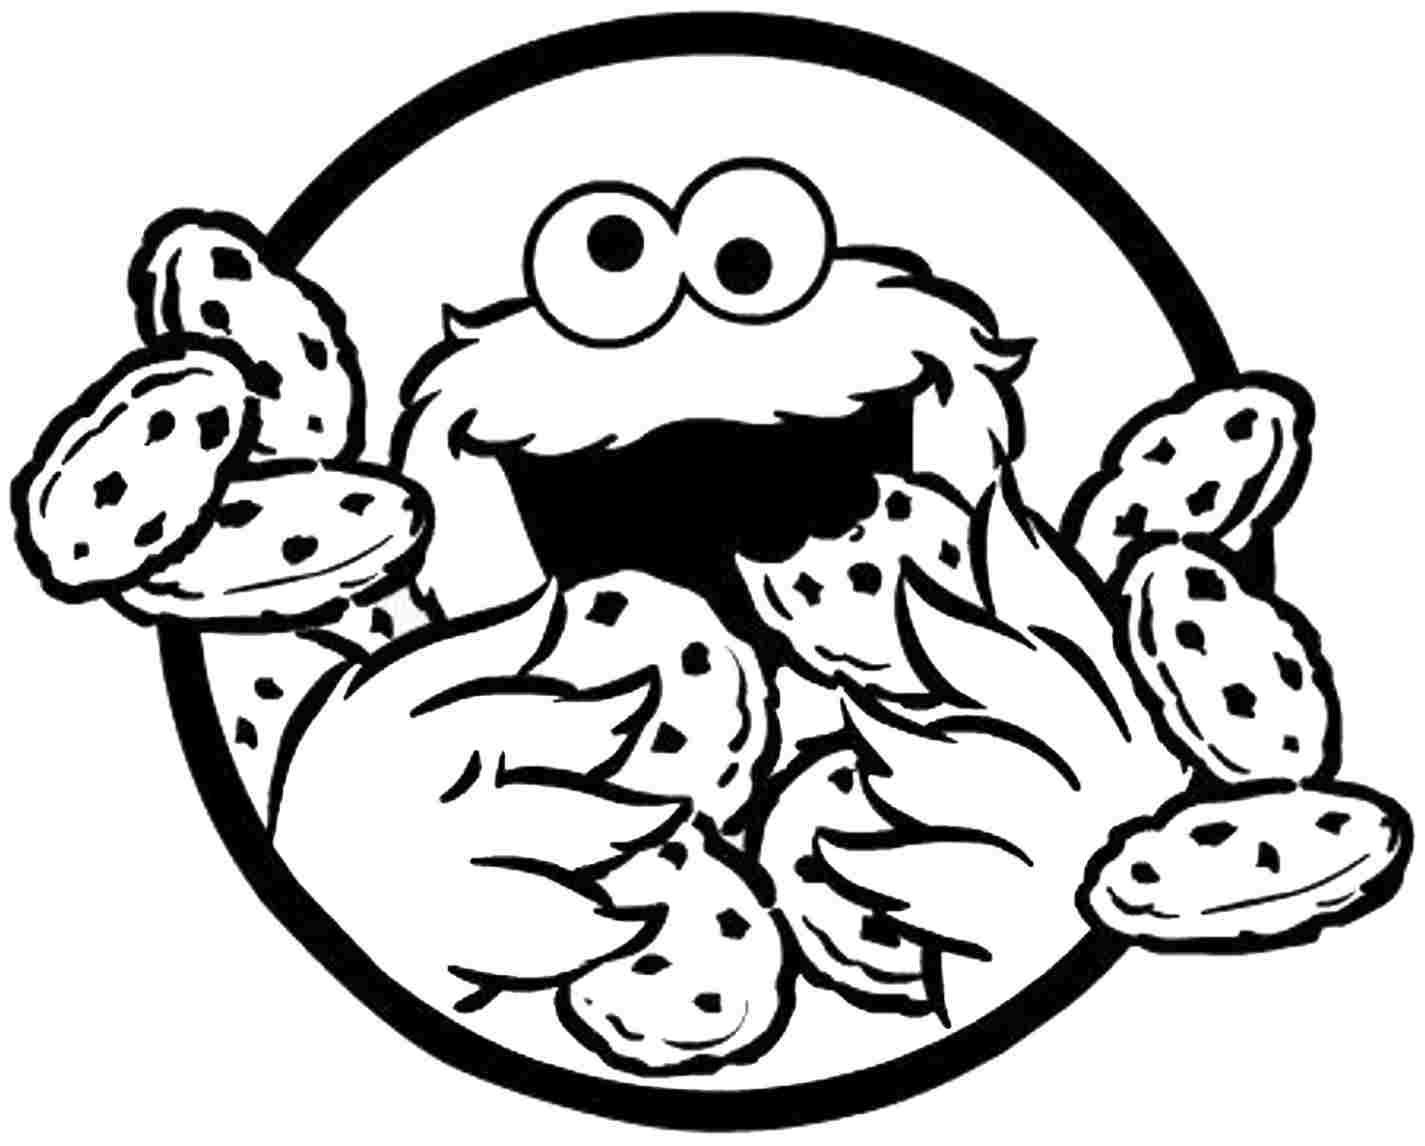 Cookie Monster Coloring Pages (19 Pictures) - Colorine.net | 11689